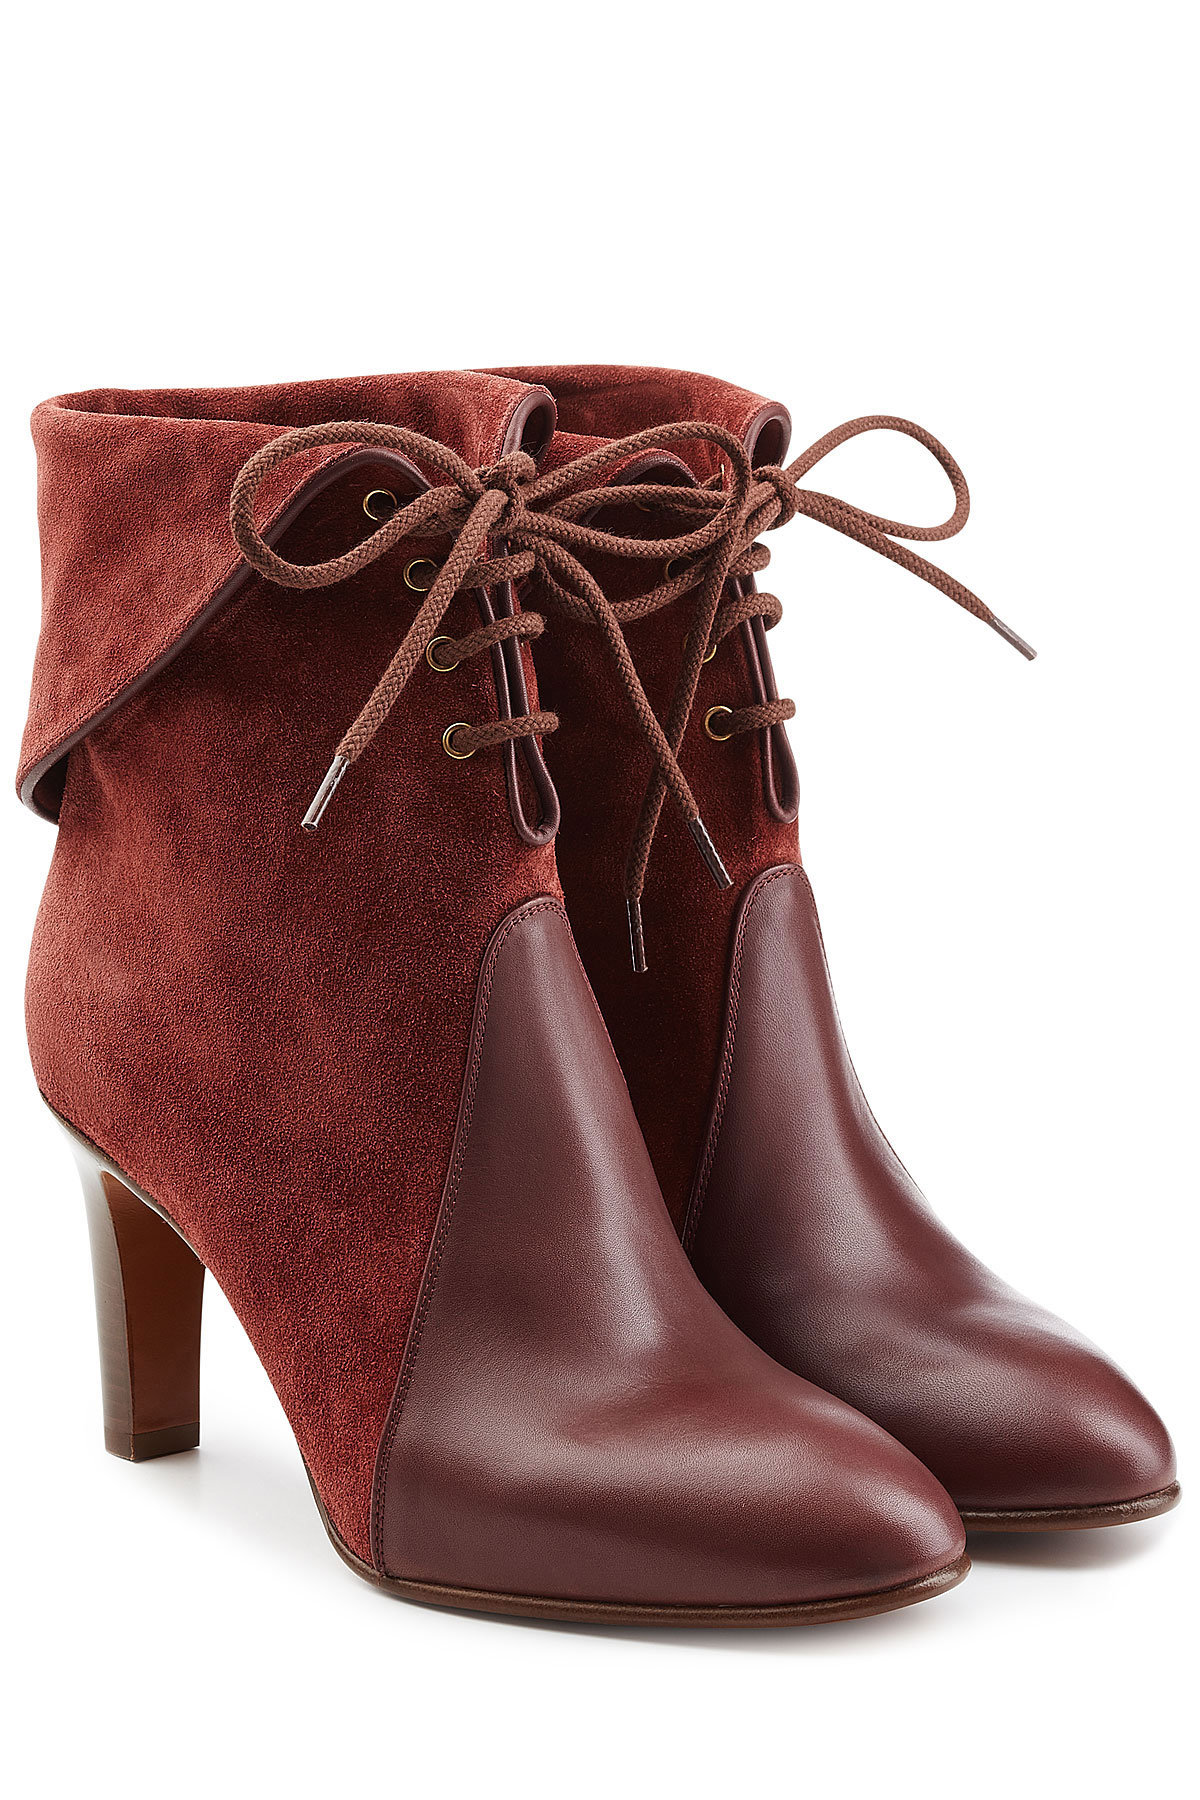 Chloe - Suede and Leather Lace-Up Boots